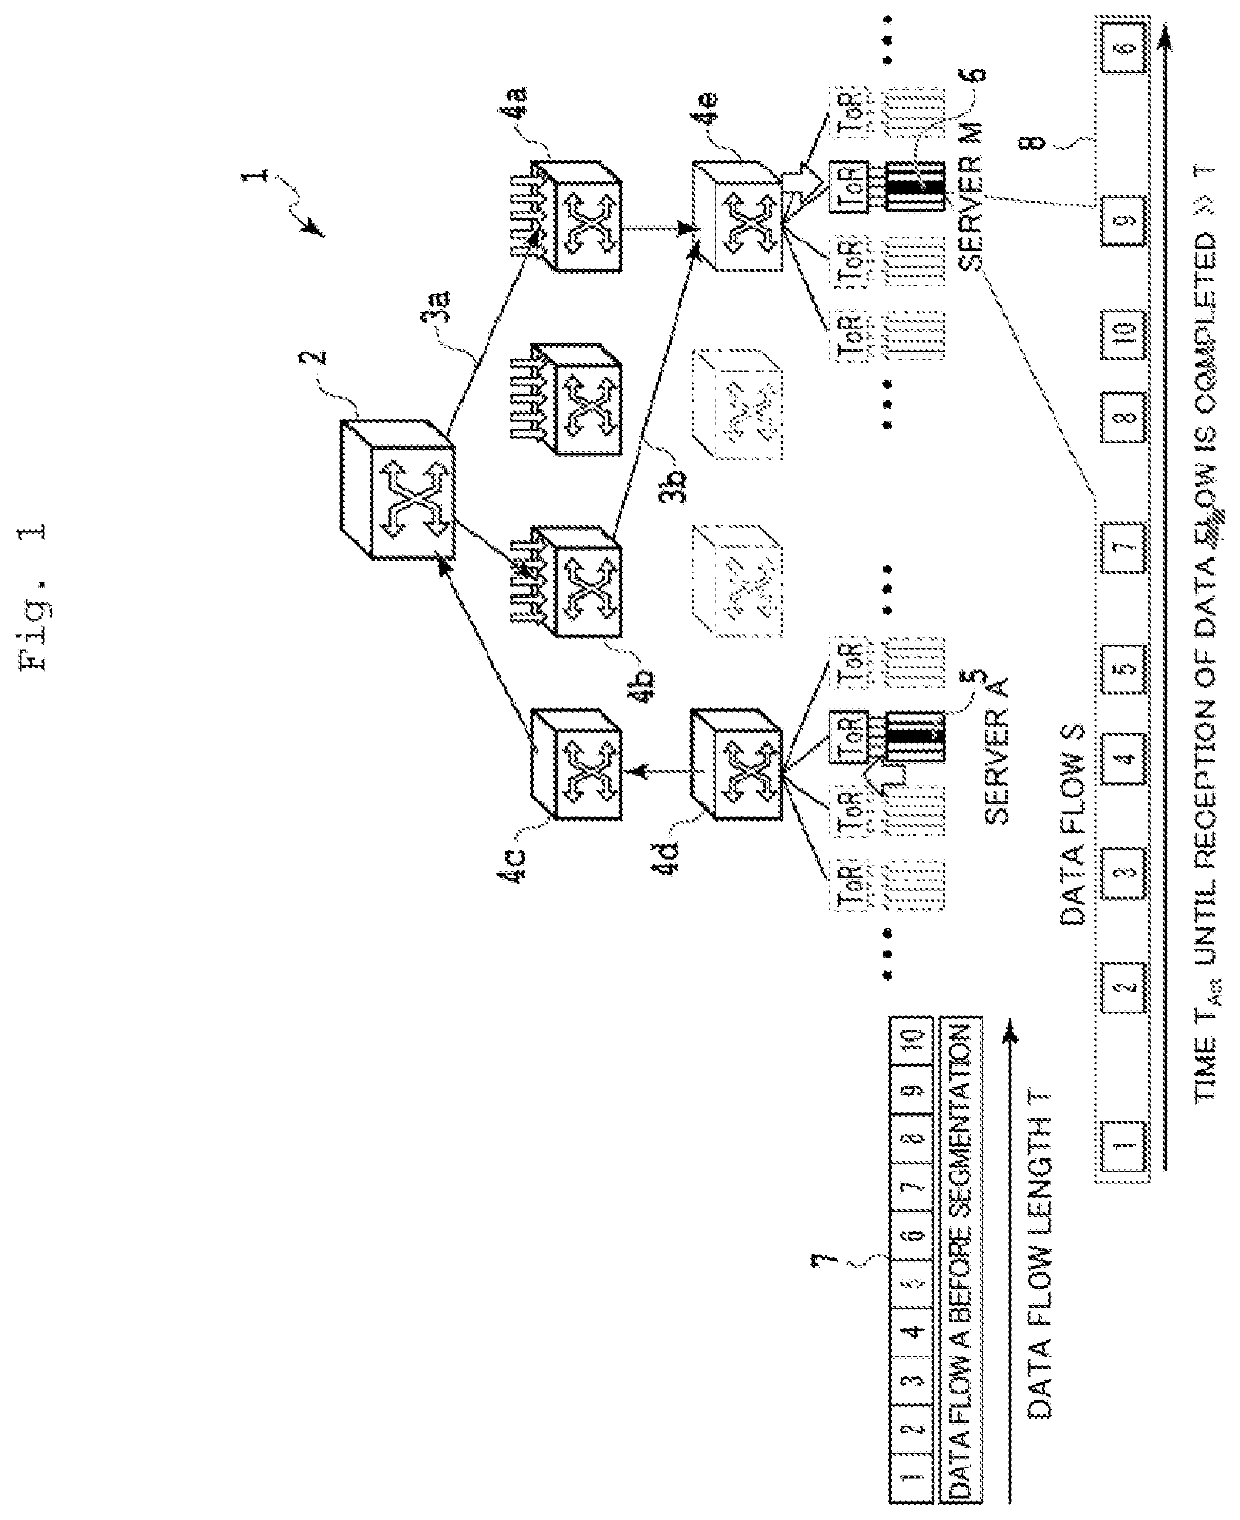 Optical Network, Optical Transport System, and Optical Node Included Therein